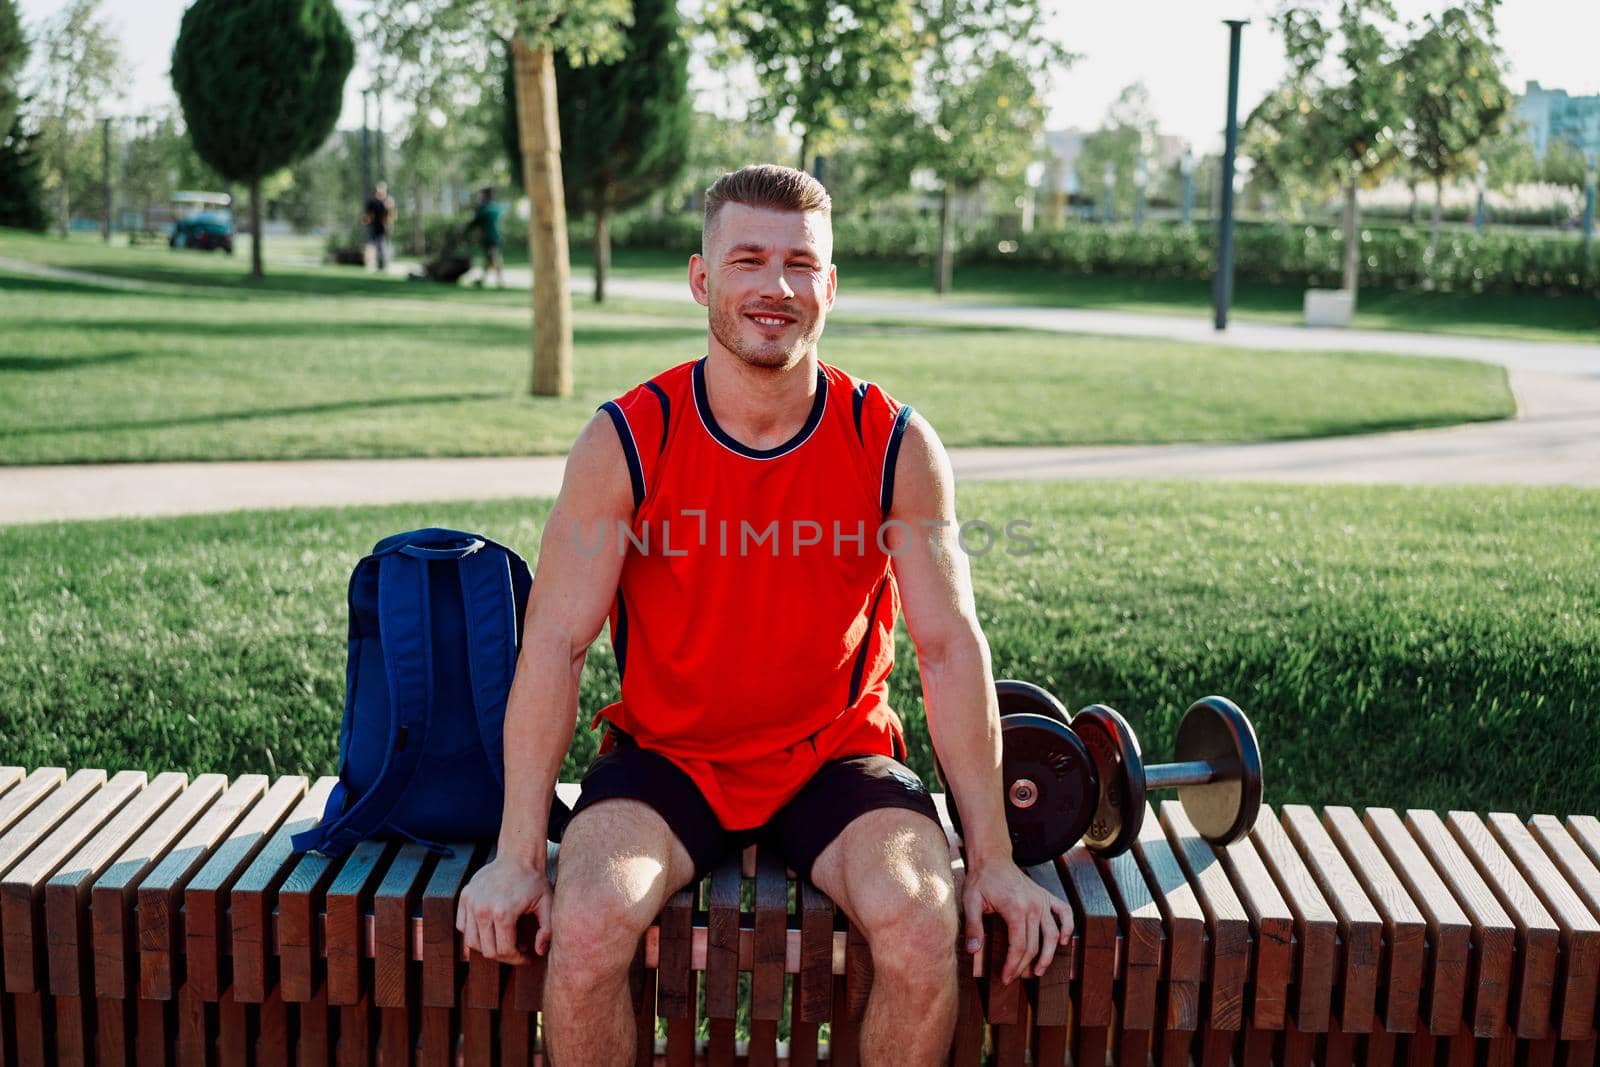 athletic man in red t-shirt in fitness park. High quality photo